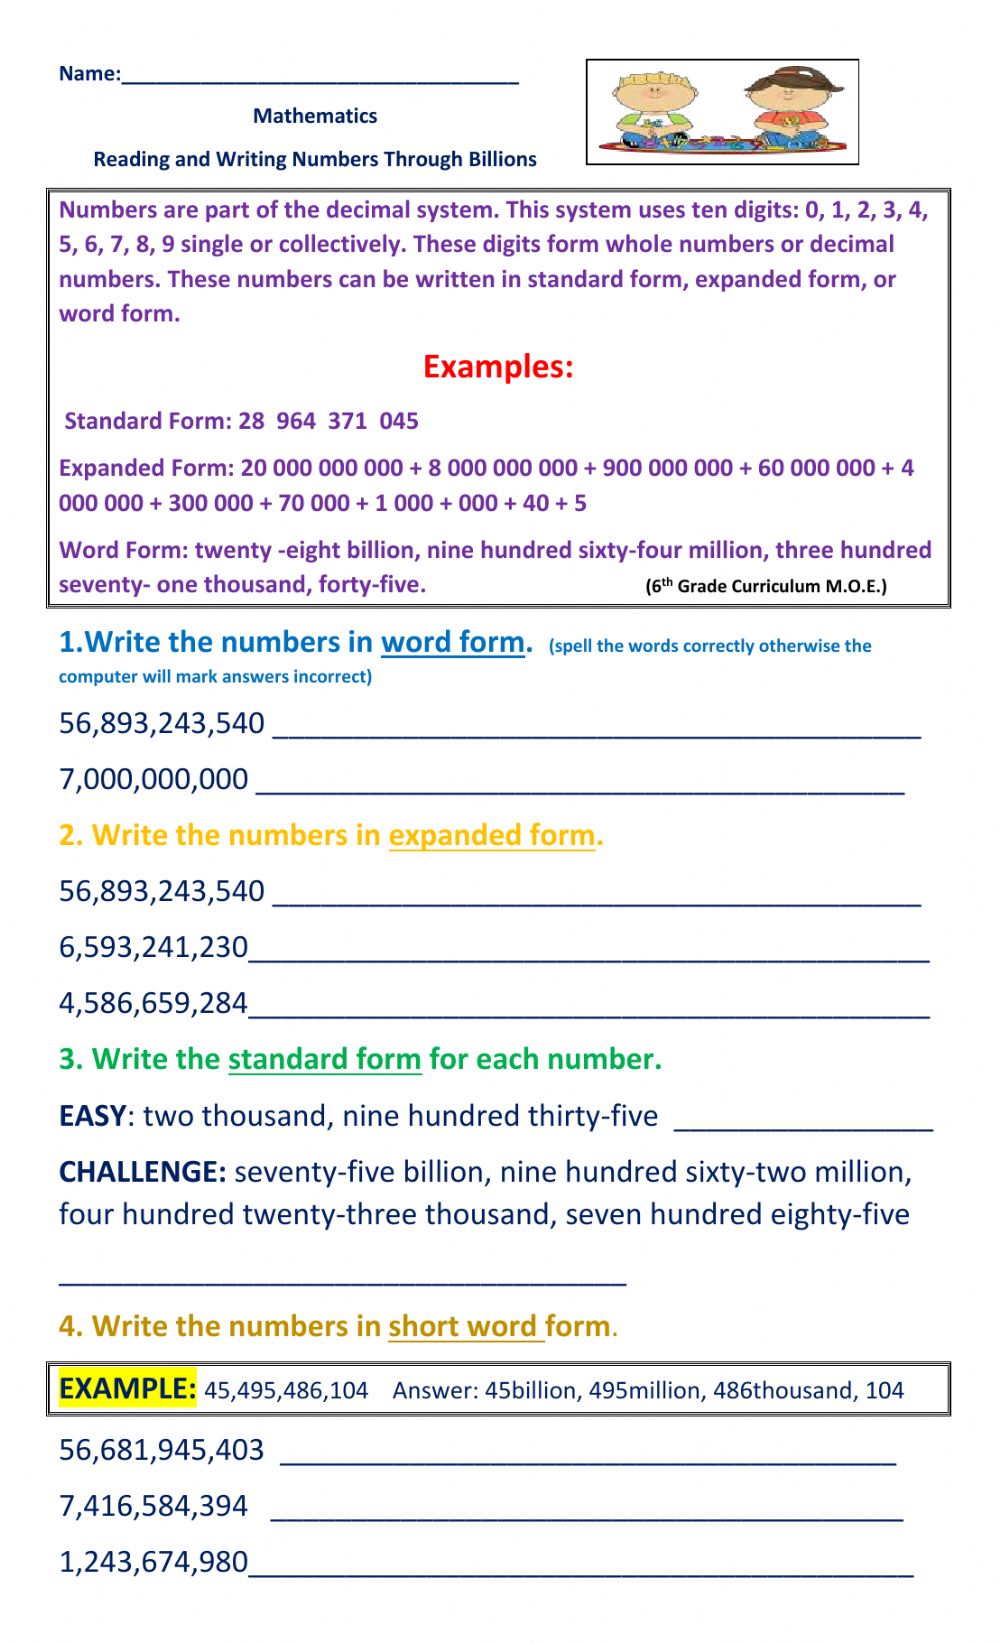 Reading And Writing Numbers Through Billions Worksheet